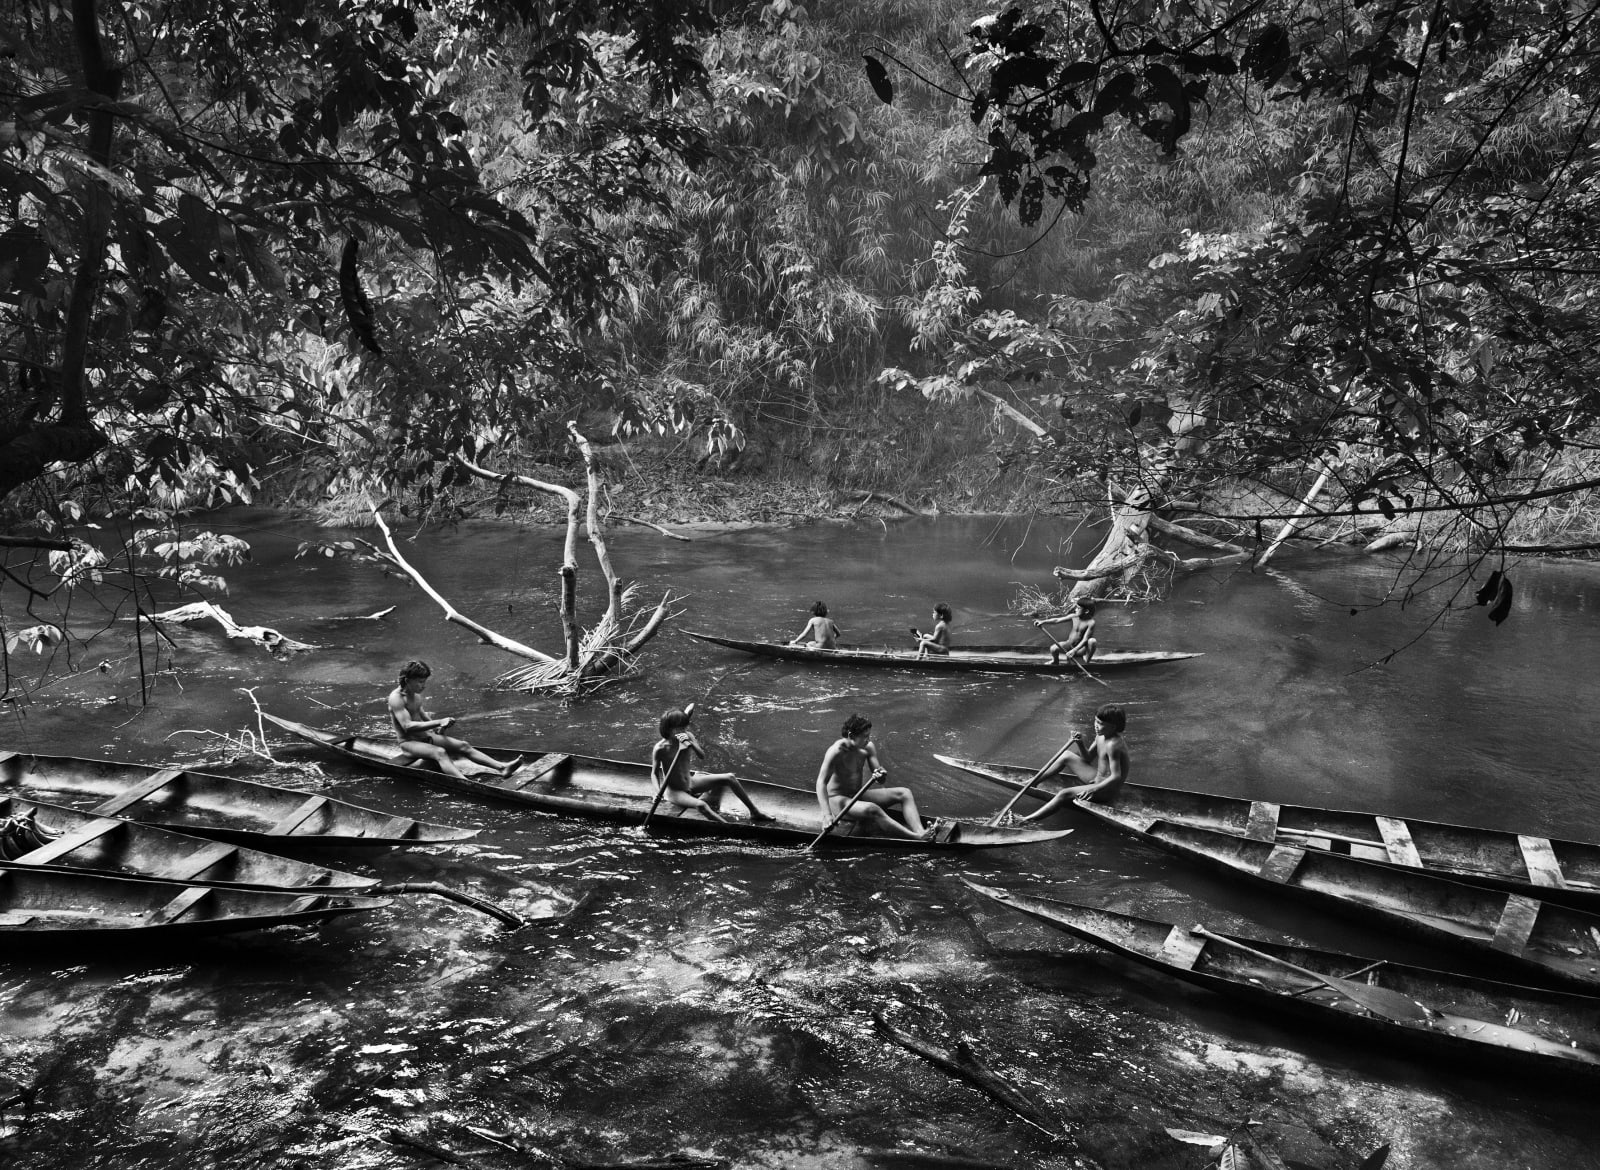 Sebastião Salgado, Fishing with timbó, a toxic substance that can paralyze  fish, in the Jukihi stream. Suruwahá Indigenous Territory, State of  Amazonas, Brazil, 2017 | Robert Klein Gallery